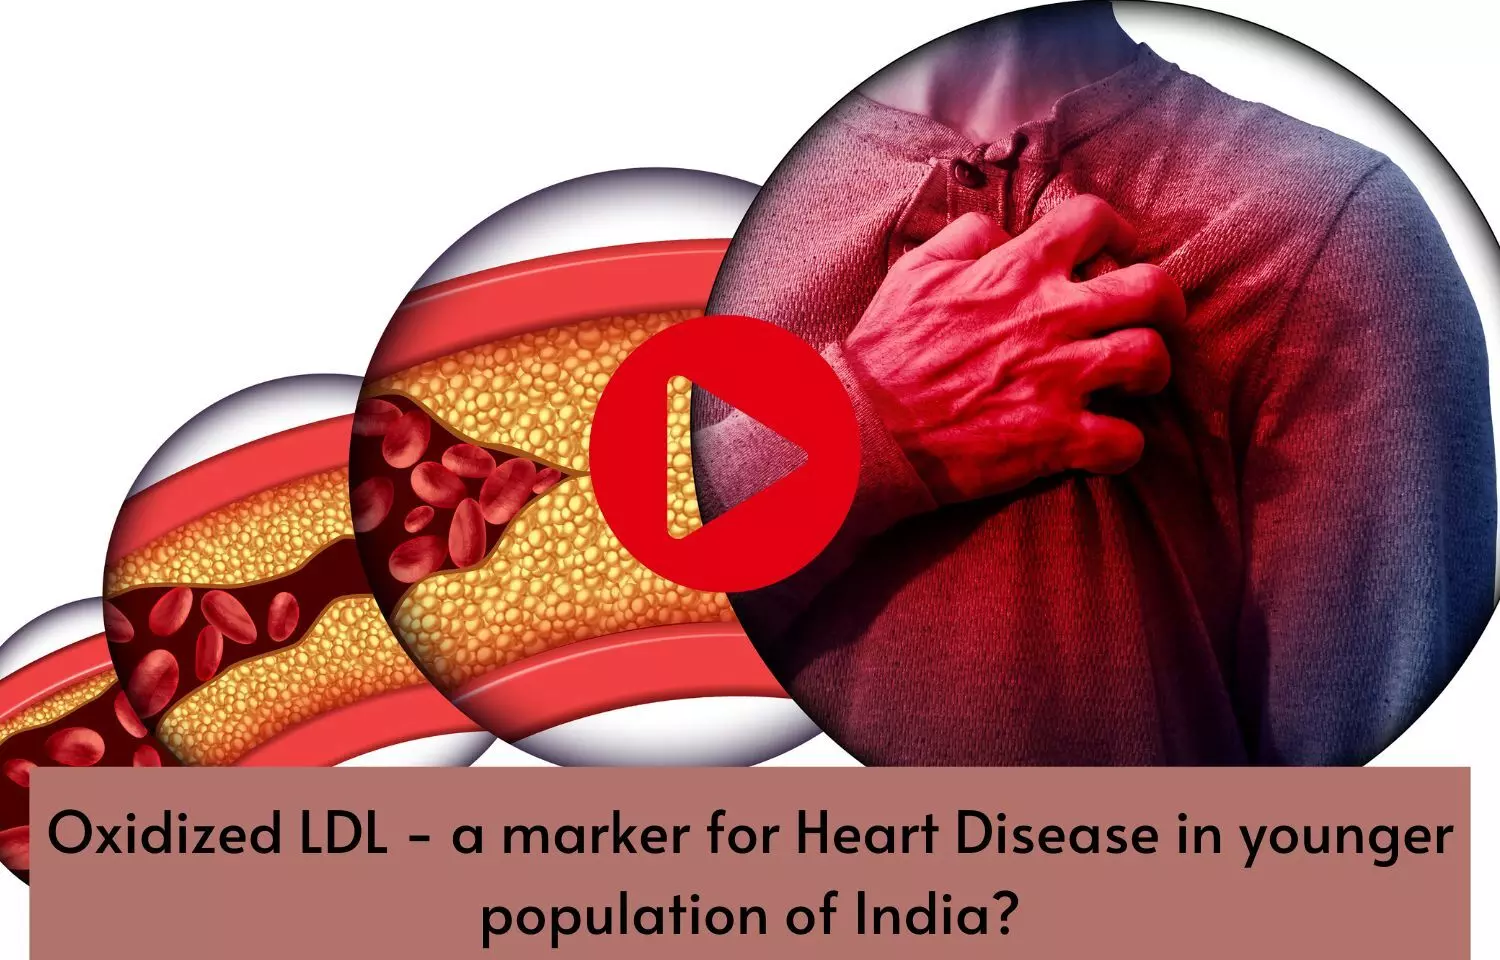 Oxidized LDL - a marker for Heart Disease in younger population of India?